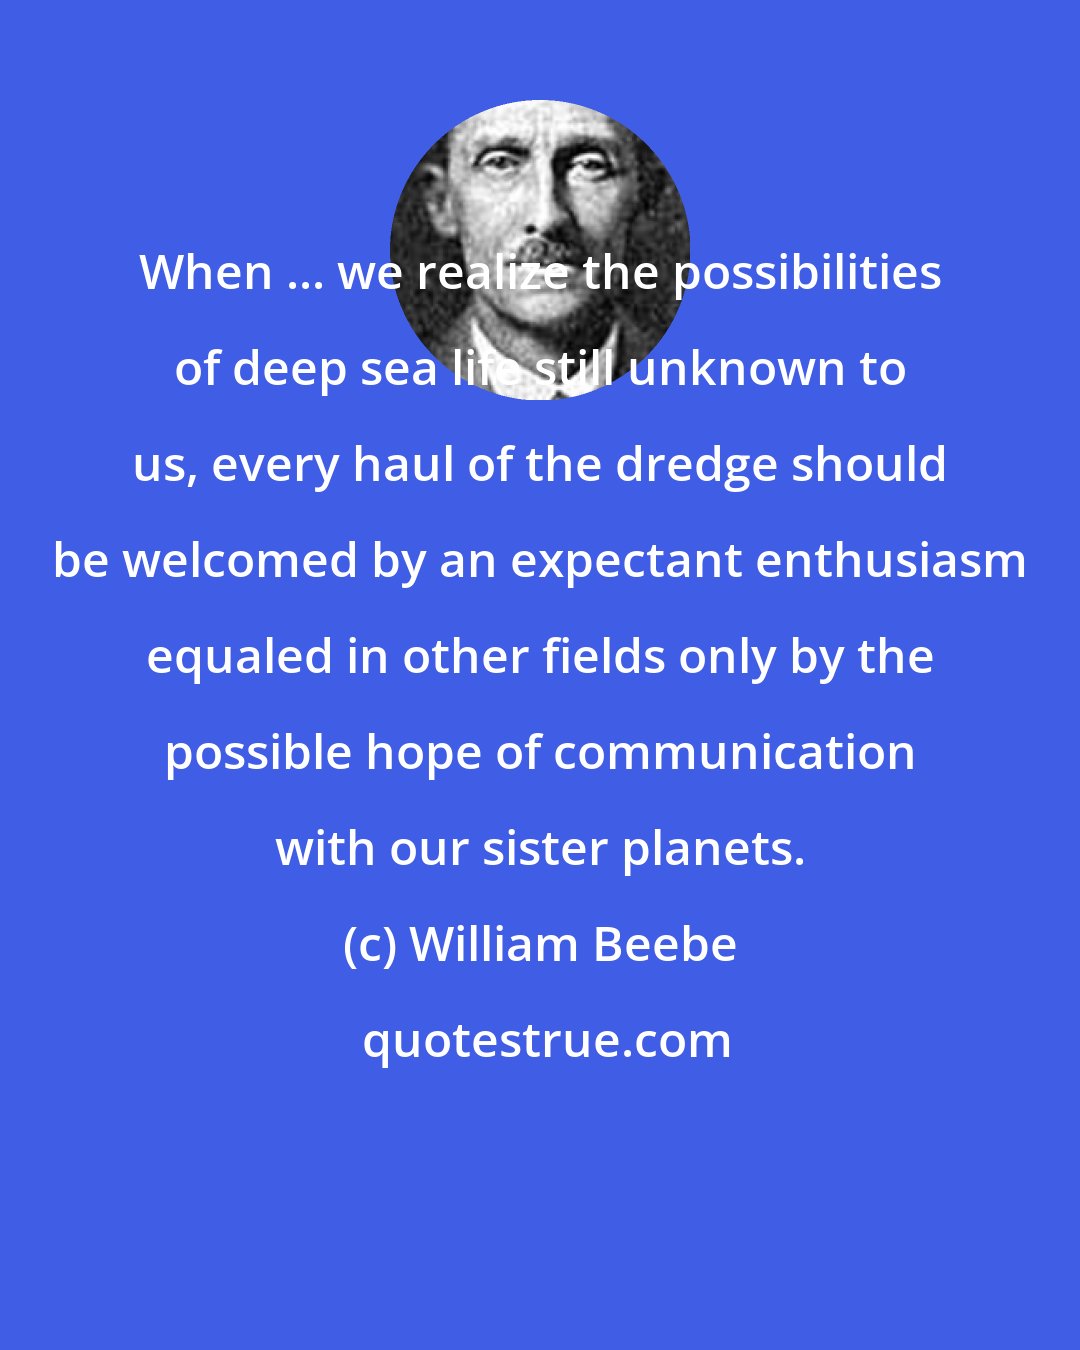 William Beebe: When ... we realize the possibilities of deep sea life still unknown to us, every haul of the dredge should be welcomed by an expectant enthusiasm equaled in other fields only by the possible hope of communication with our sister planets.